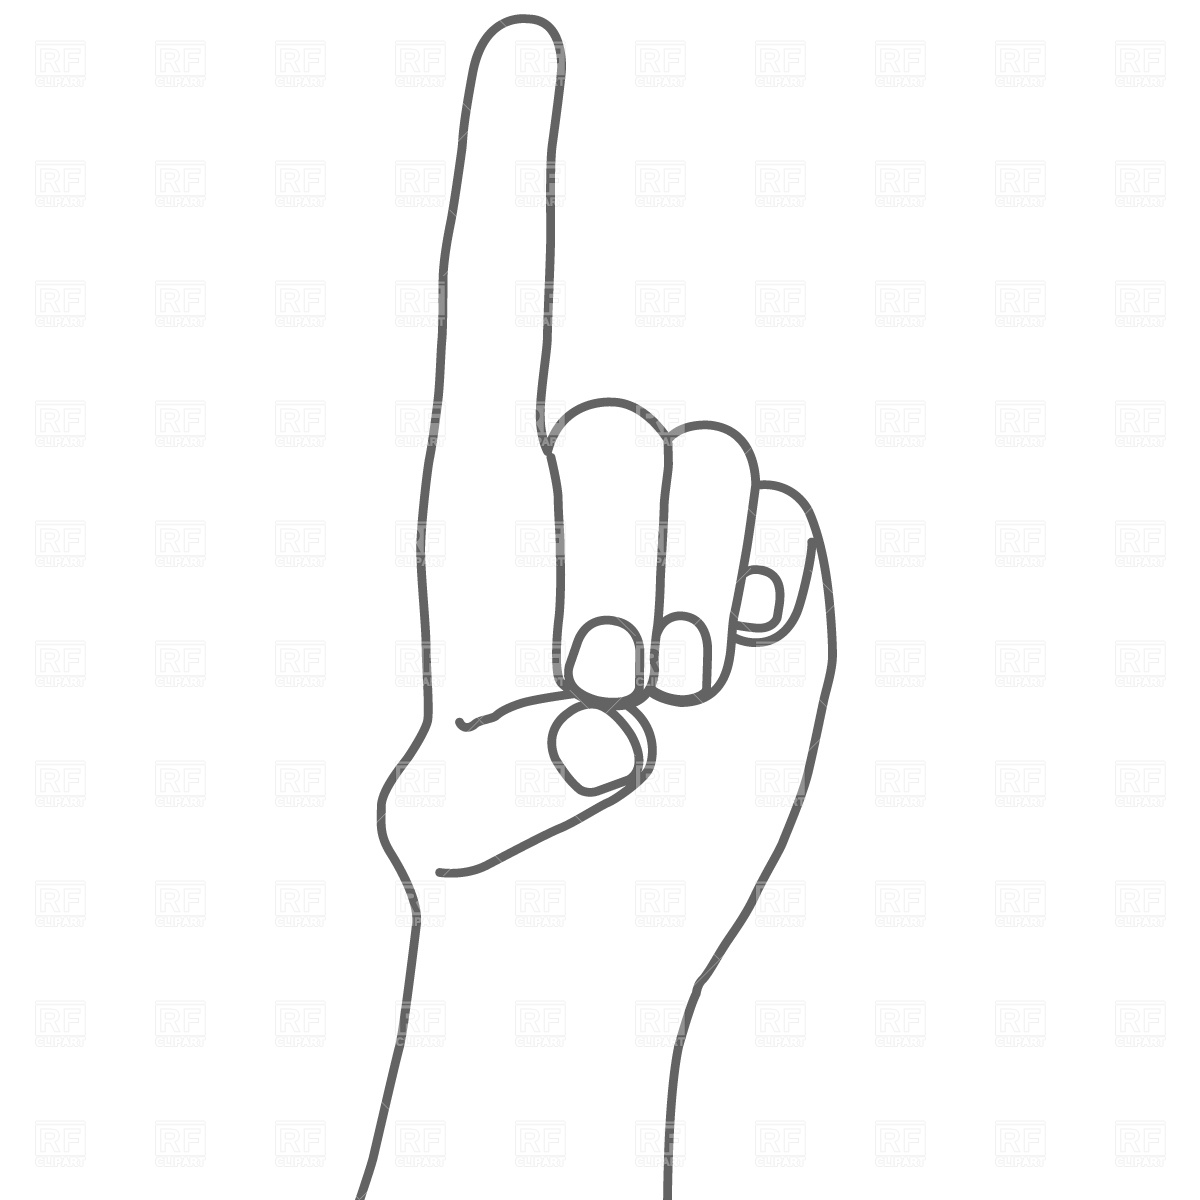 Index Finger Sign   Attention Download Royalty Free Vector Clipart